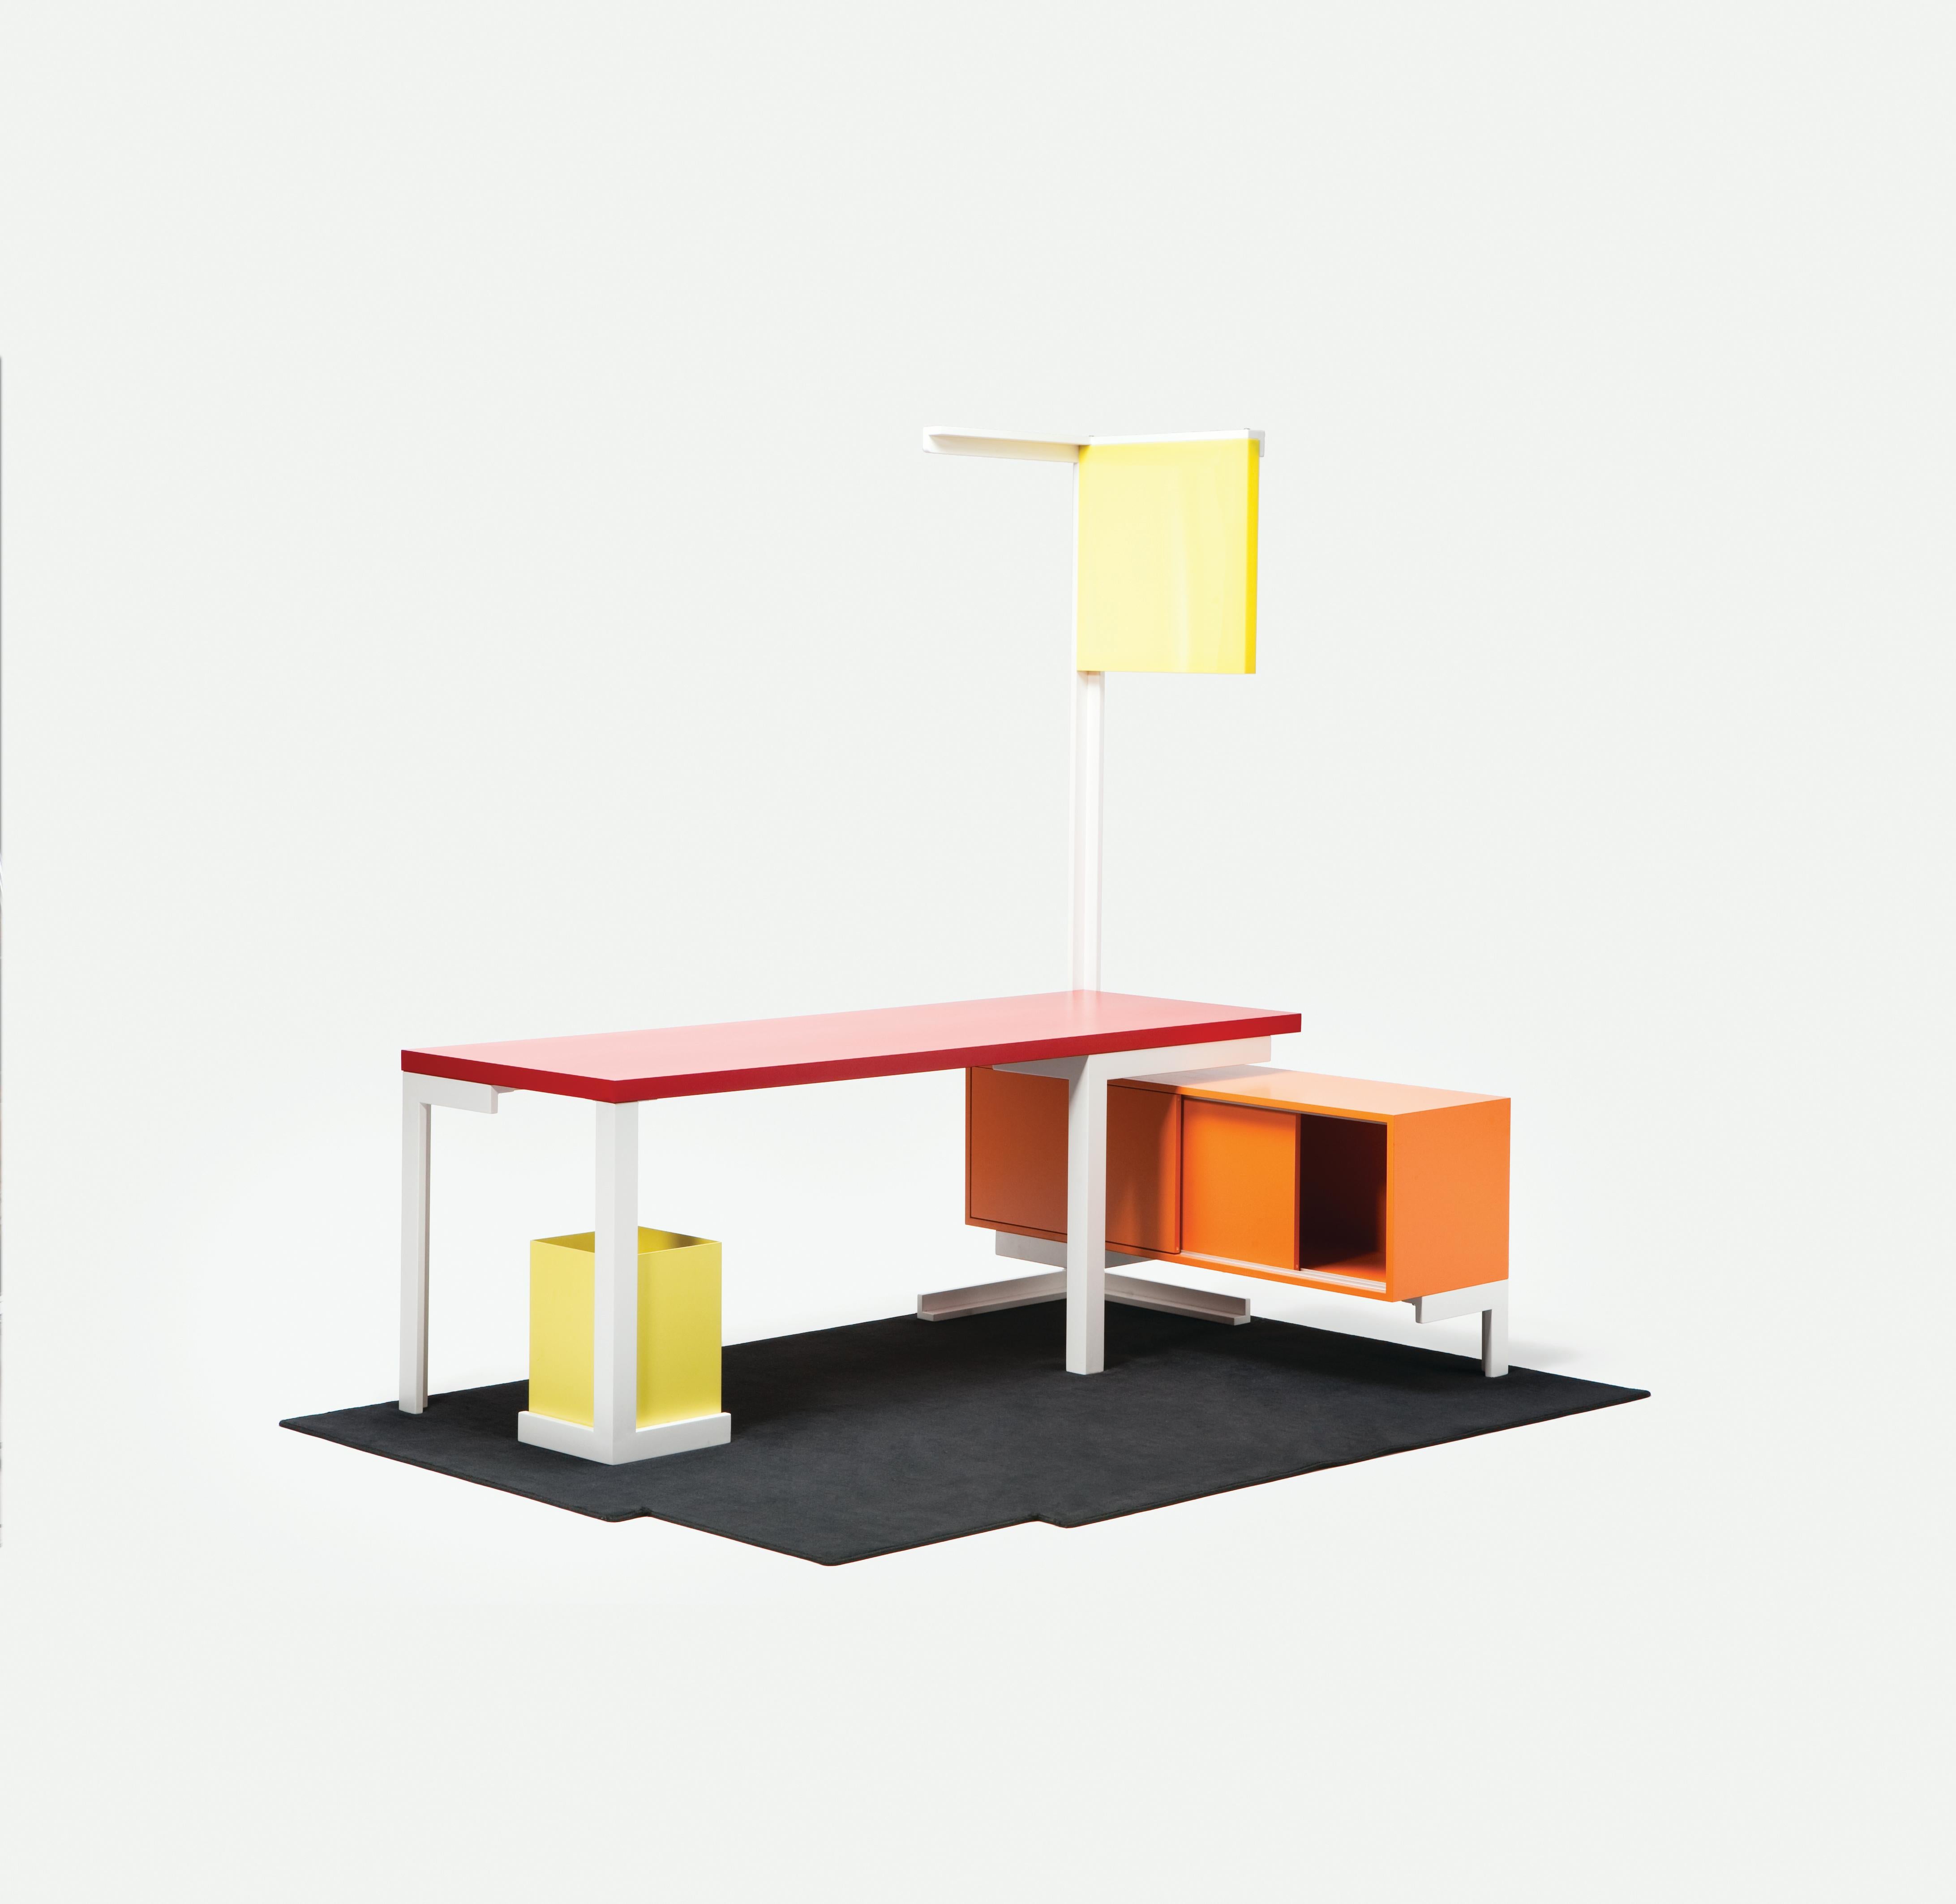 Open Room No.1 is intended to act as a room within a room. It is an architecturally minded product design with a clear function. Although it is without walls, Crasset explains that this workstation has implied boundaries formed by the angles of a